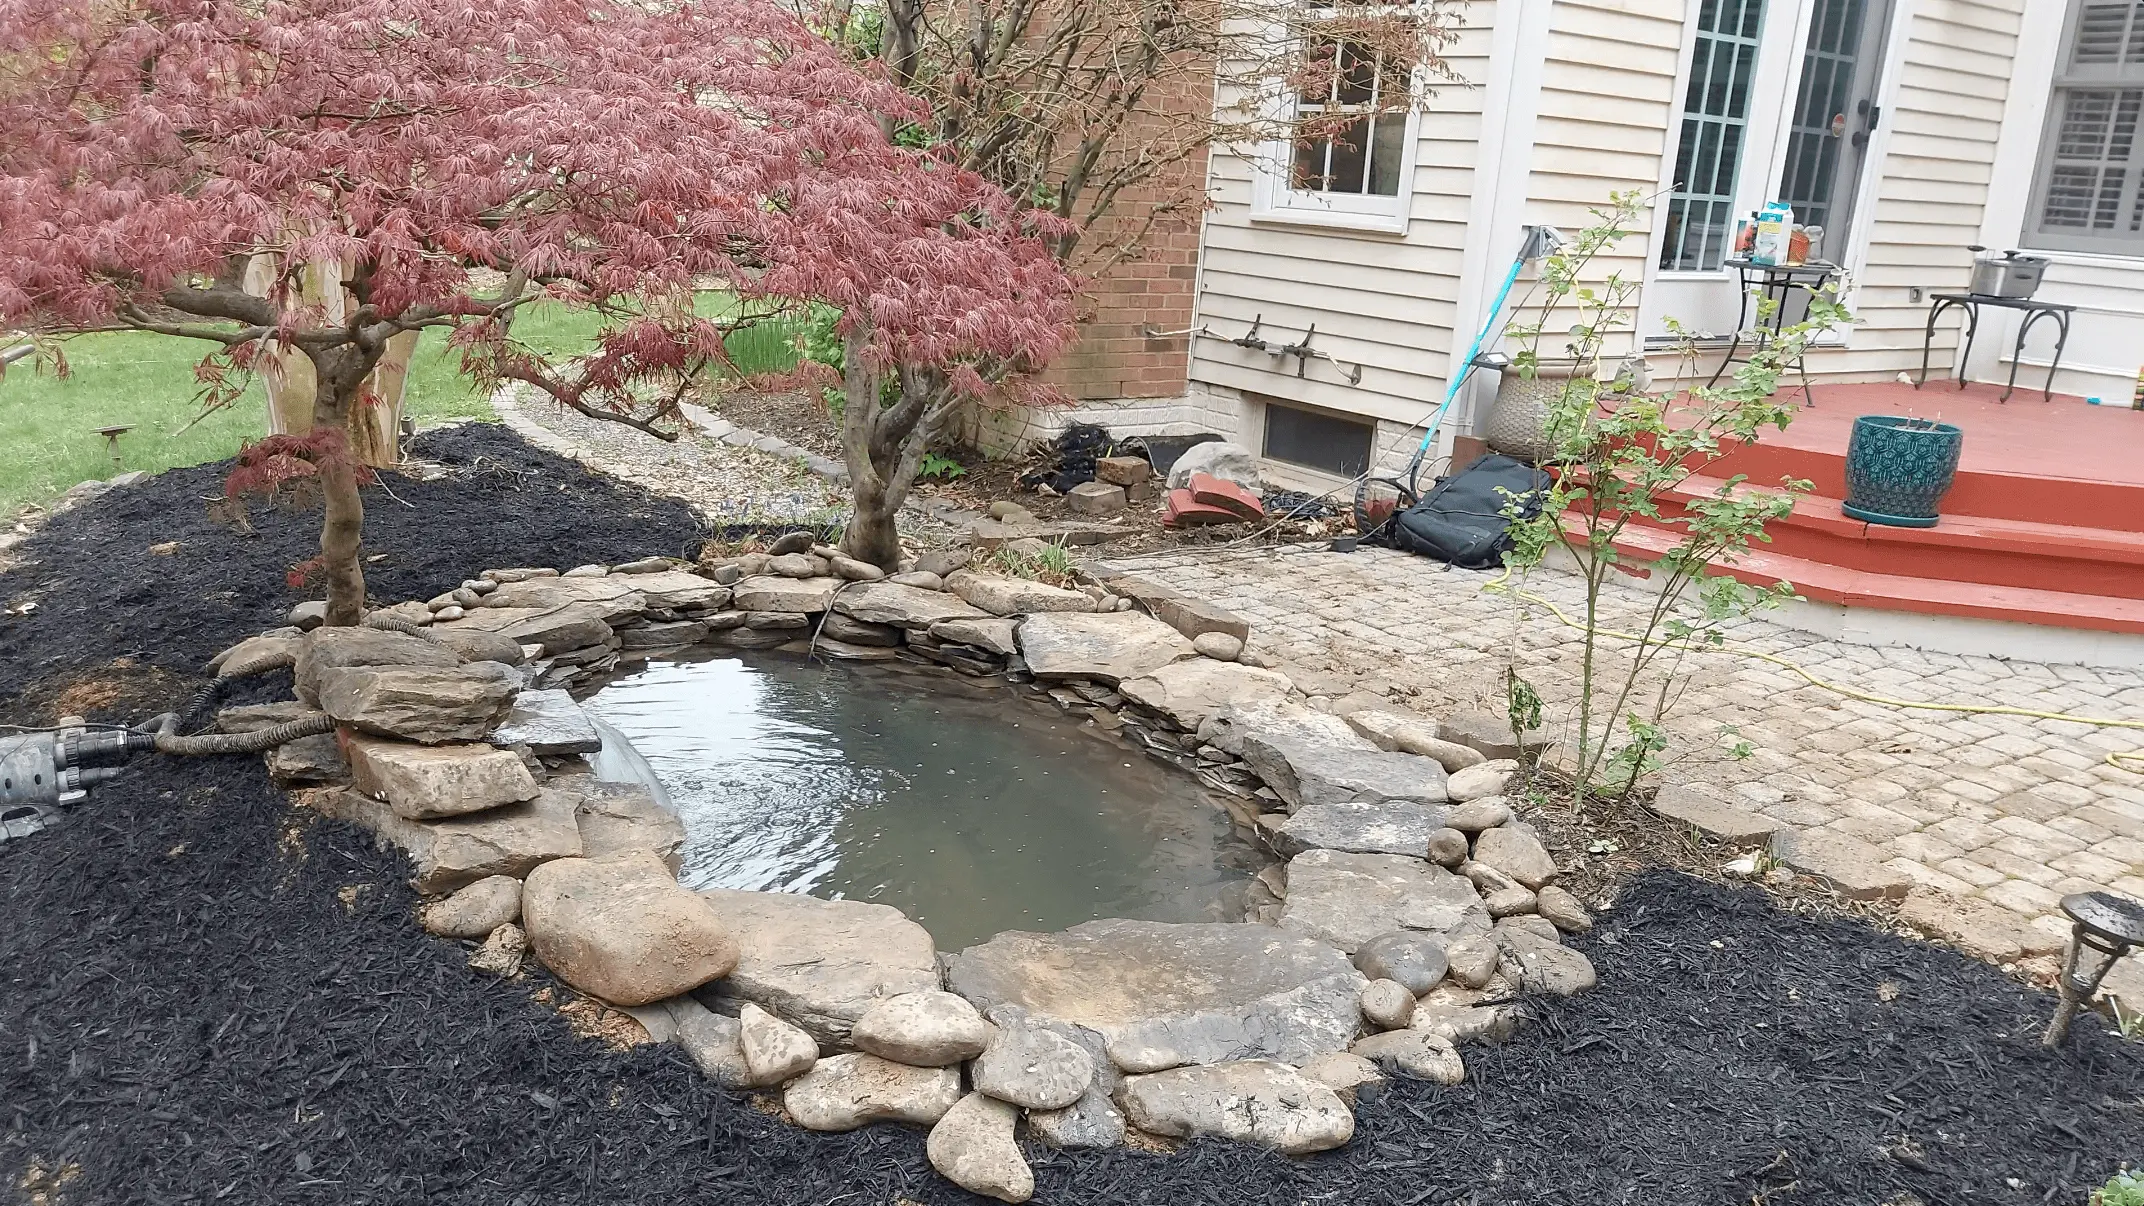 A small pond built under a japanese maple tree in Germantown, MD. The pond was built with the waterfall facing the house 
					so that our clients can view it from the outdoor patio, kitchen, and living room. The pond was equipped with a pressure filter for filtration. Most pressure filters have a backwash system that allows the pond to be drained without an external pump. The backwash can be used to clean the media inside the filter and do water changes at the same time. 